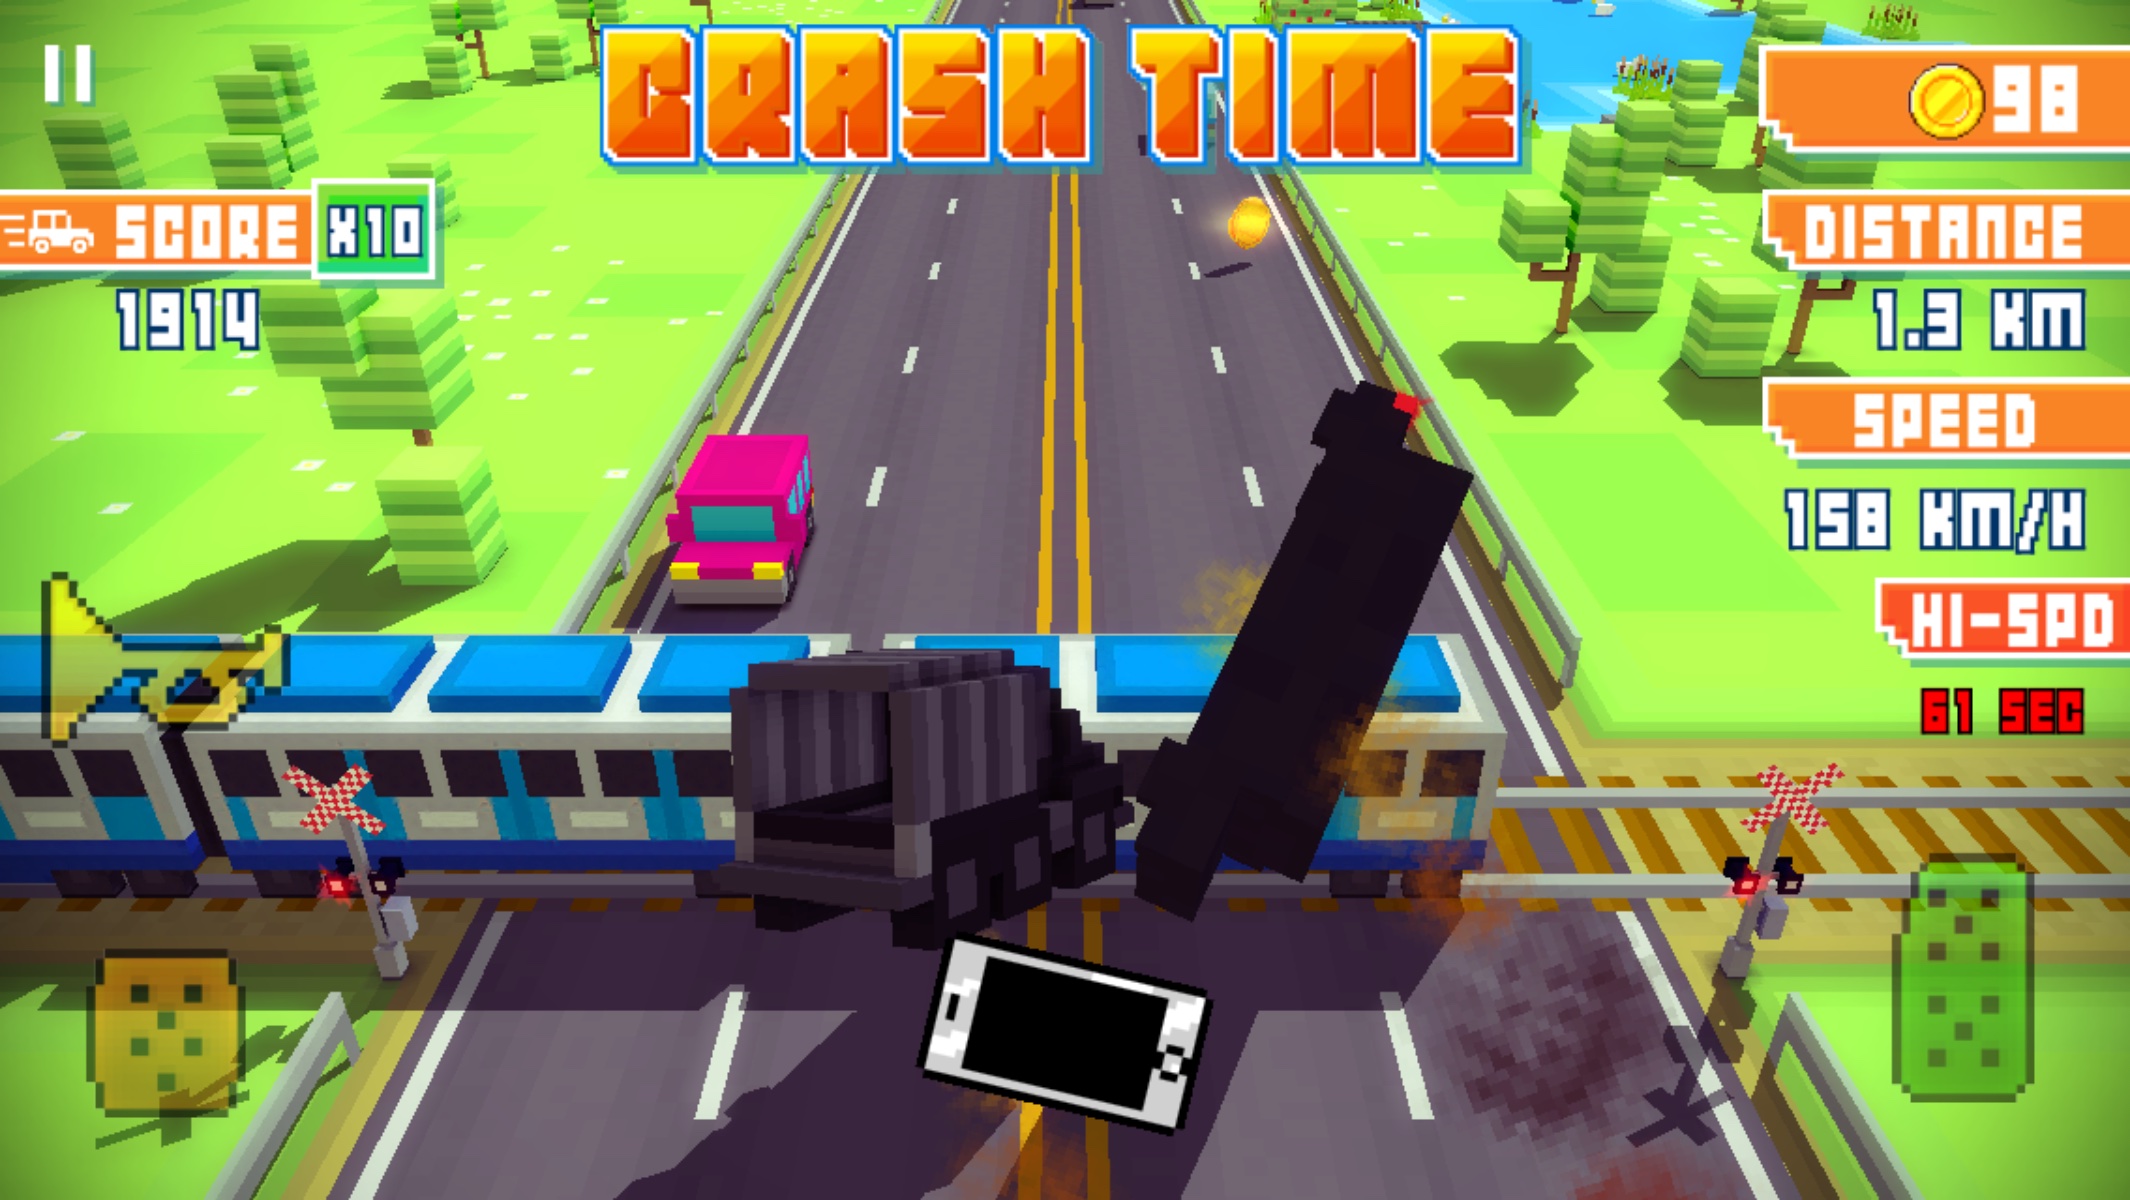 Blocky Highway androidアプリスクリーンショット3